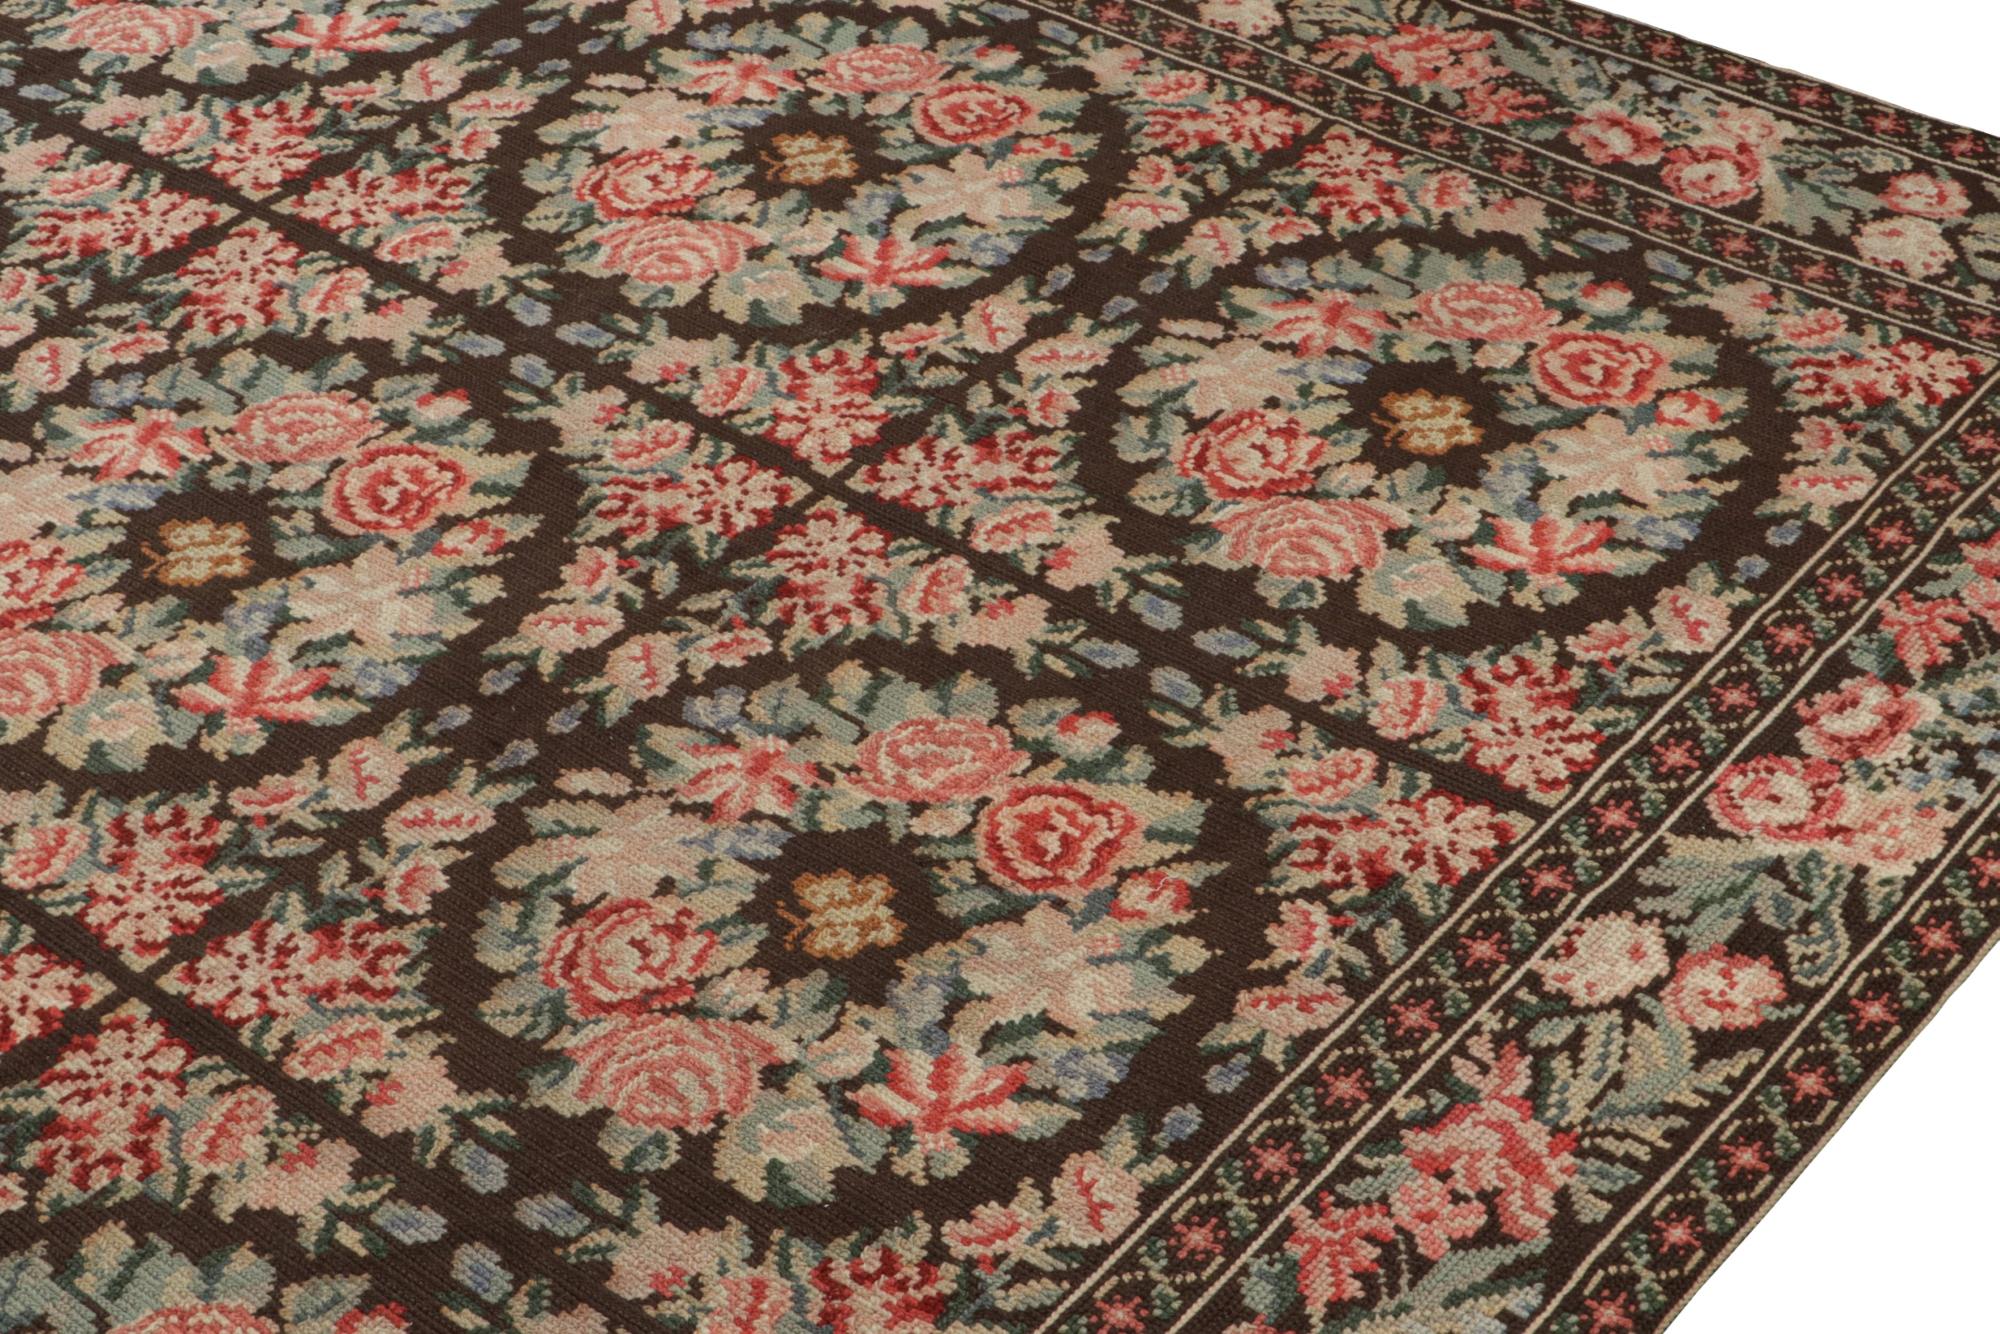 Early 20th Century Antique Needlepoint rug in Brown with Botanical Florals, from Rug & Kilim For Sale